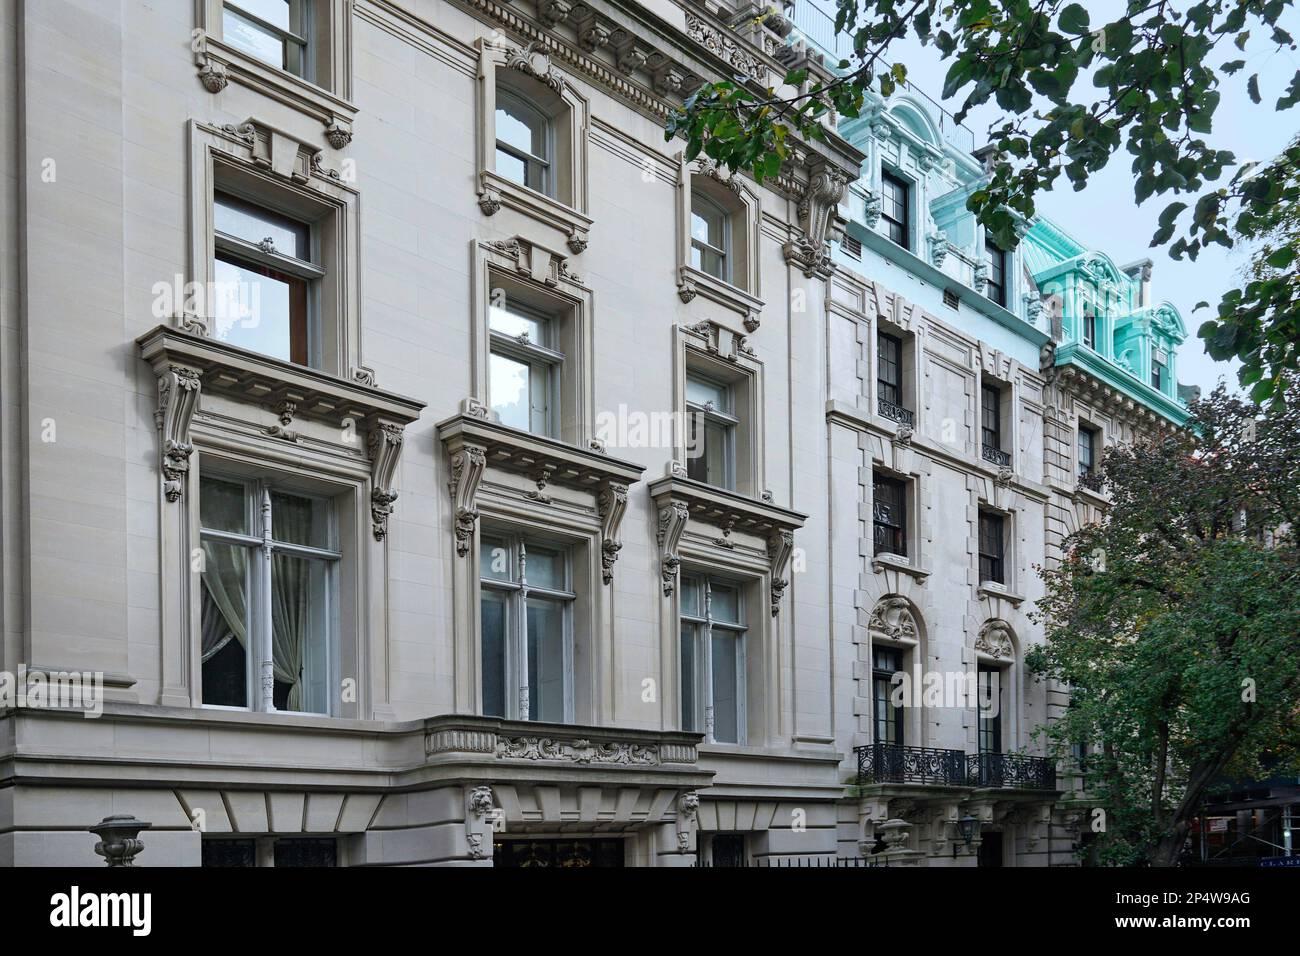 New York City, French Renaissance style mansions in Upper East Side of Manhattan, built in 1890s Stock Photo